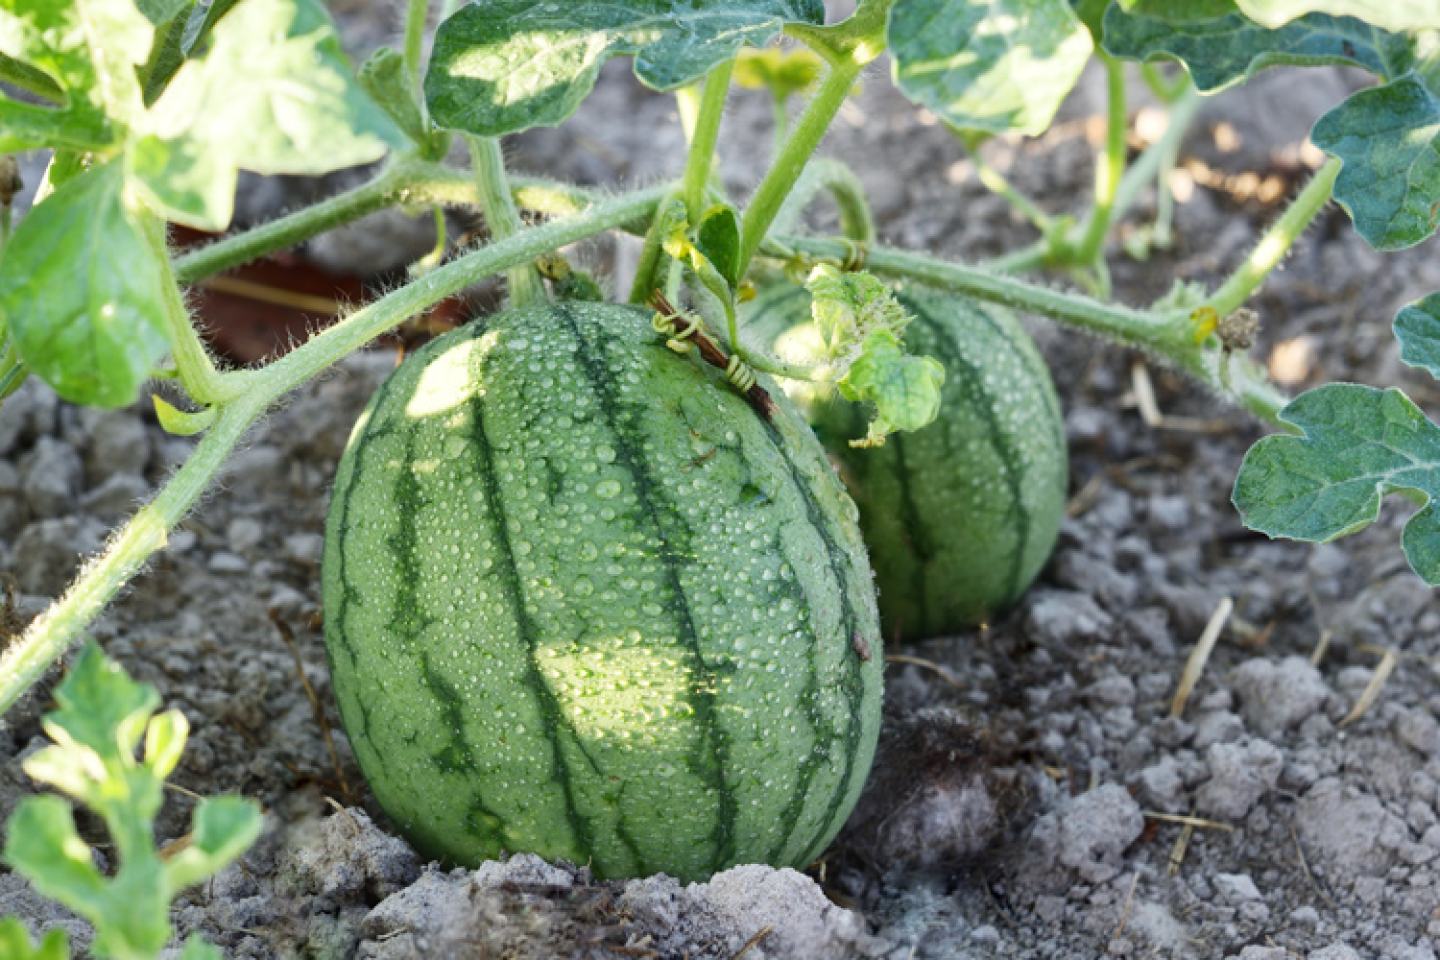 Rhyme Fungicide Available on Watermelons